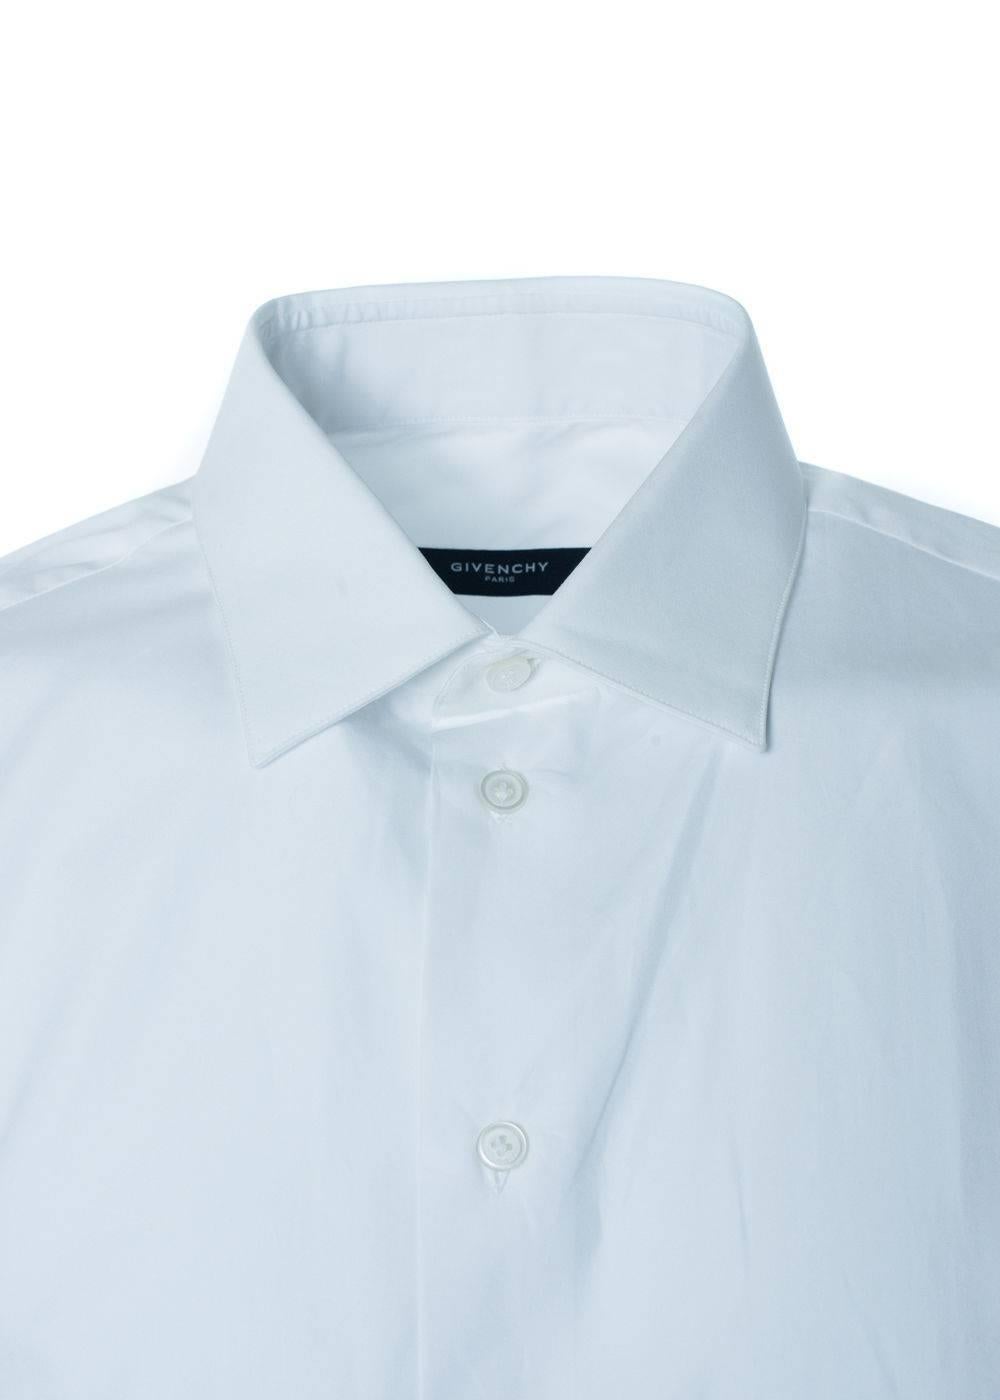 Brand New Givenchy Men's Button Down 
Original Tags
Retails in Stores & Online for $350
Men's Size E40 (XXS) Fits True to Size

Every man needs a classic white button down for those professional settings or dressy outings. This Givenchy button down